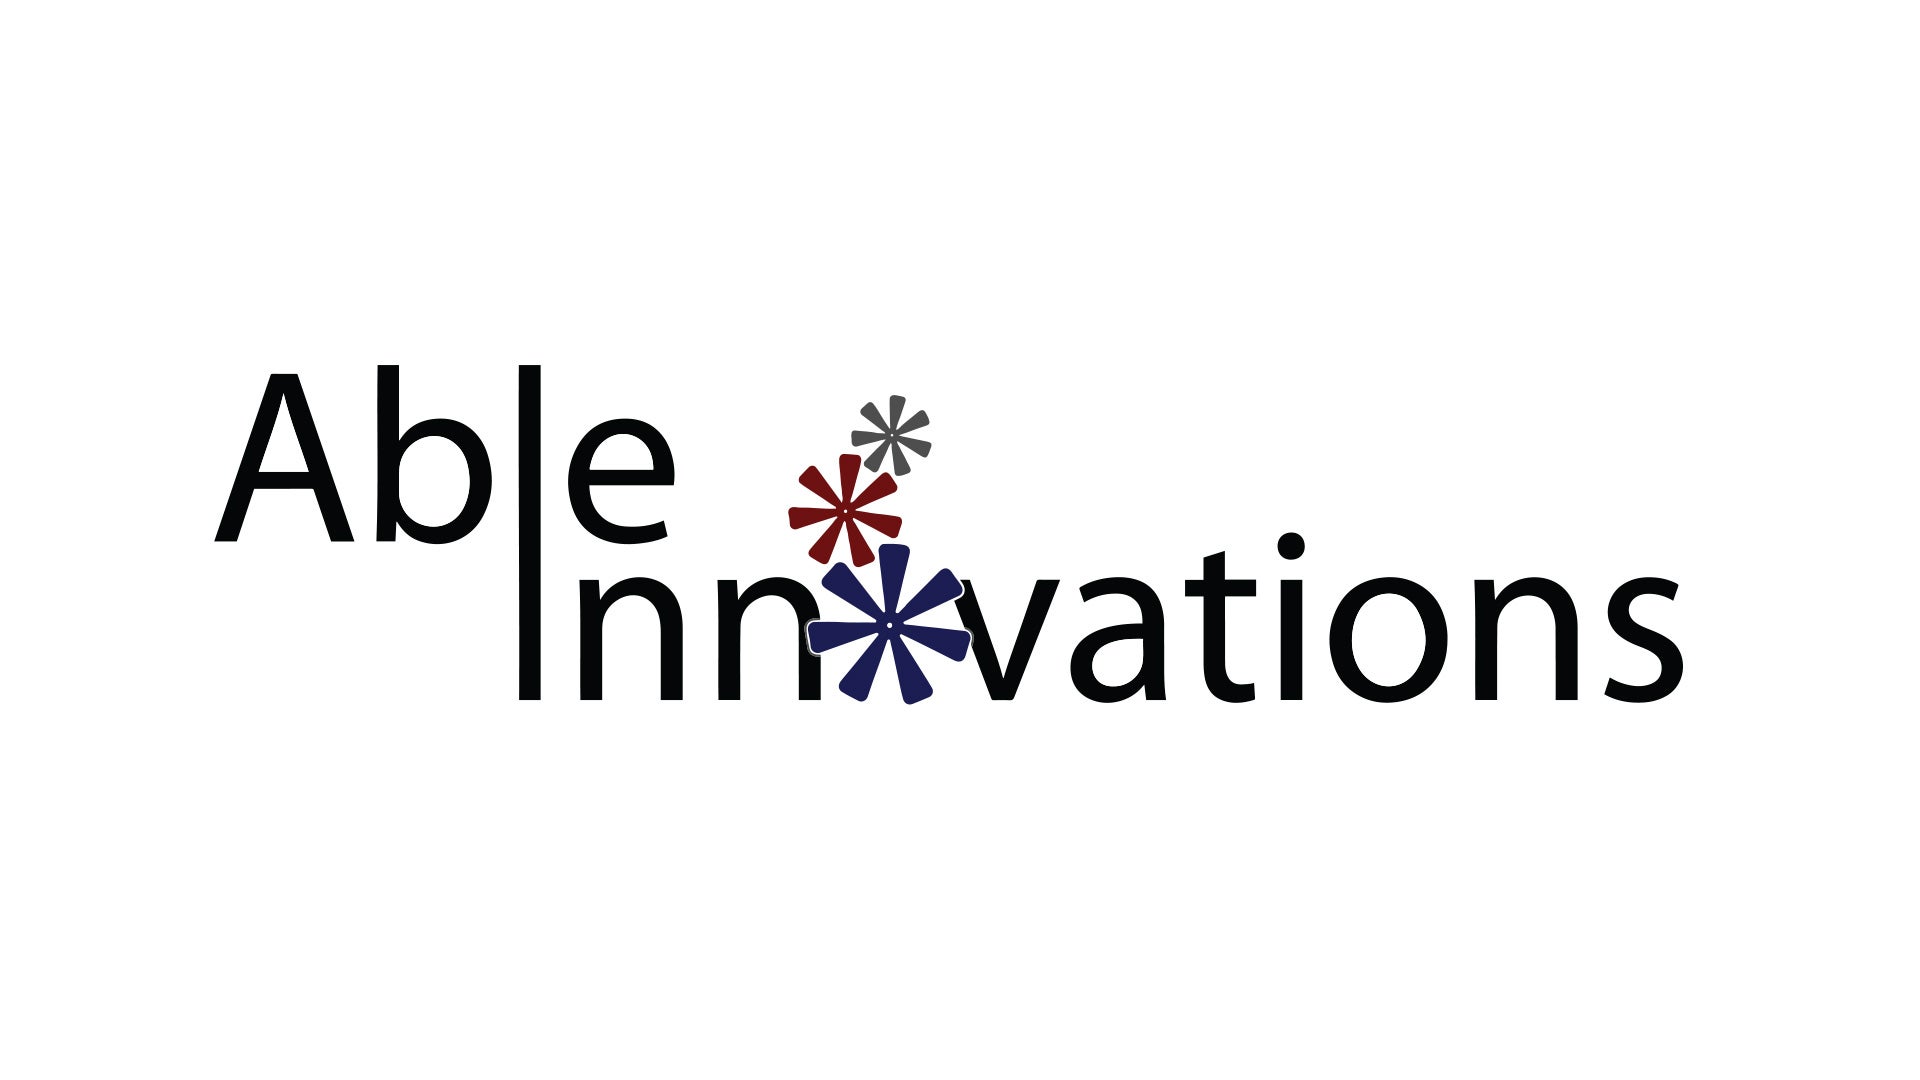 Able innovations logo